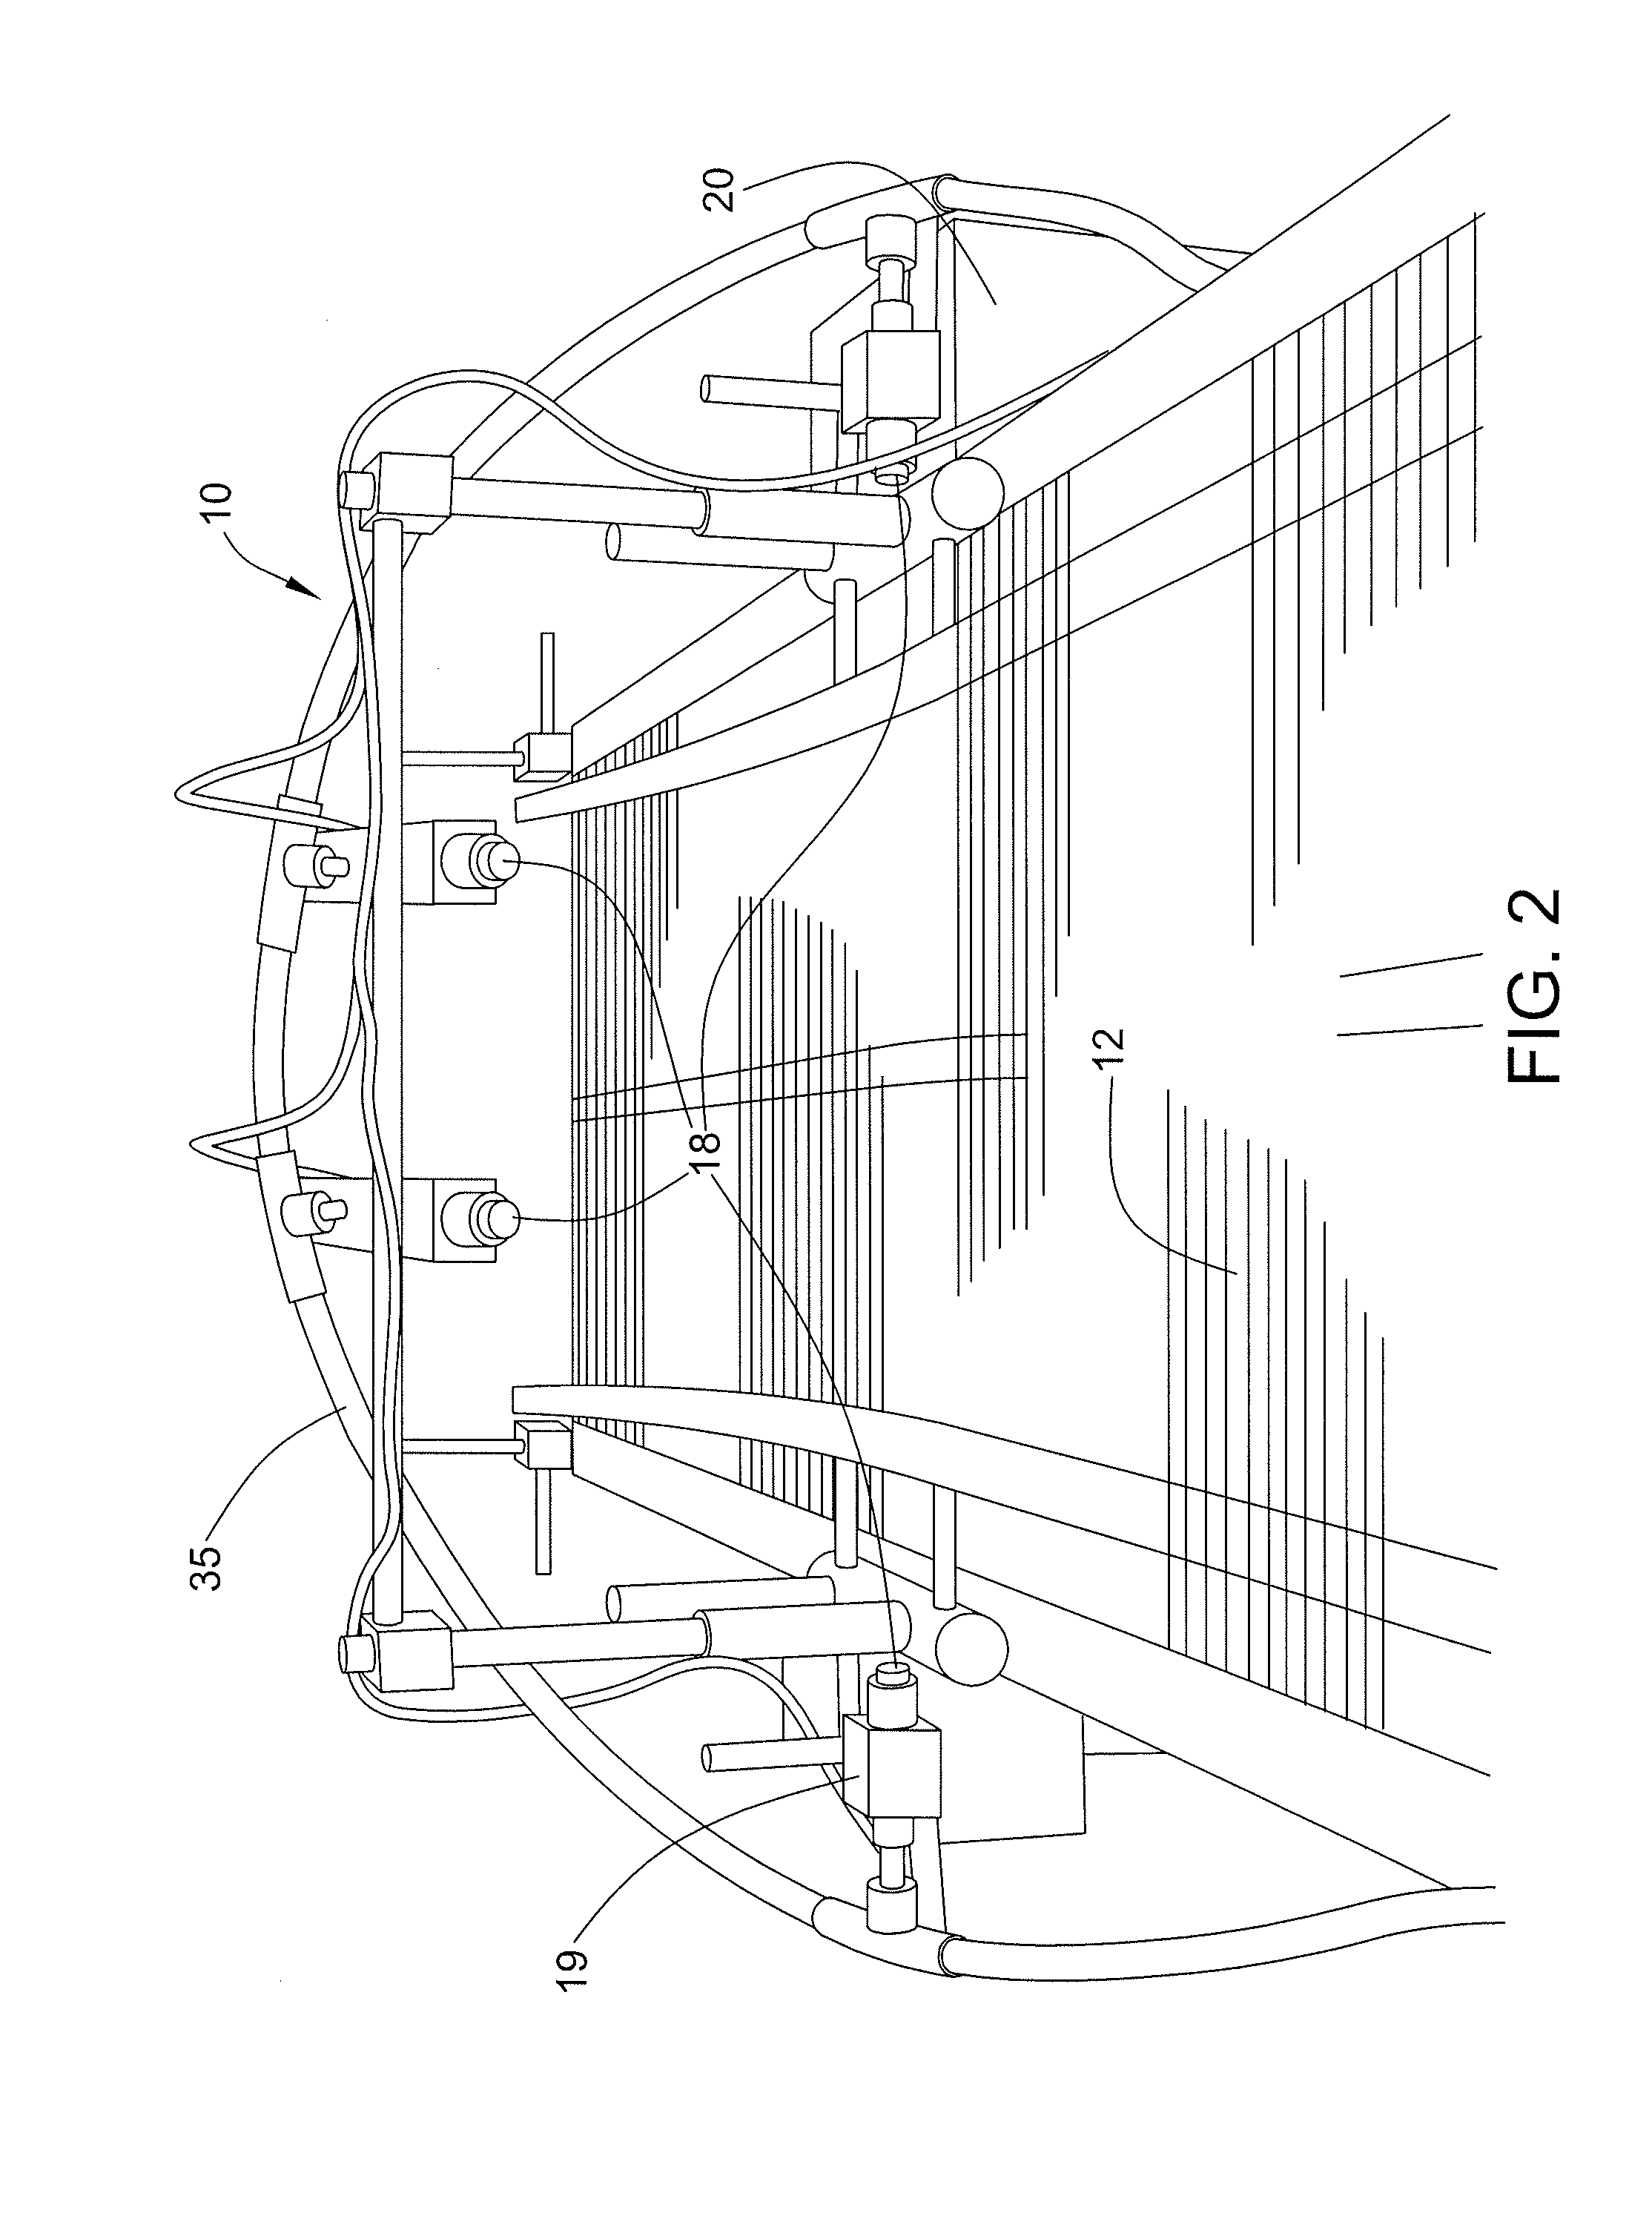 Low fluid volume antimicrobial mold reduction system and method